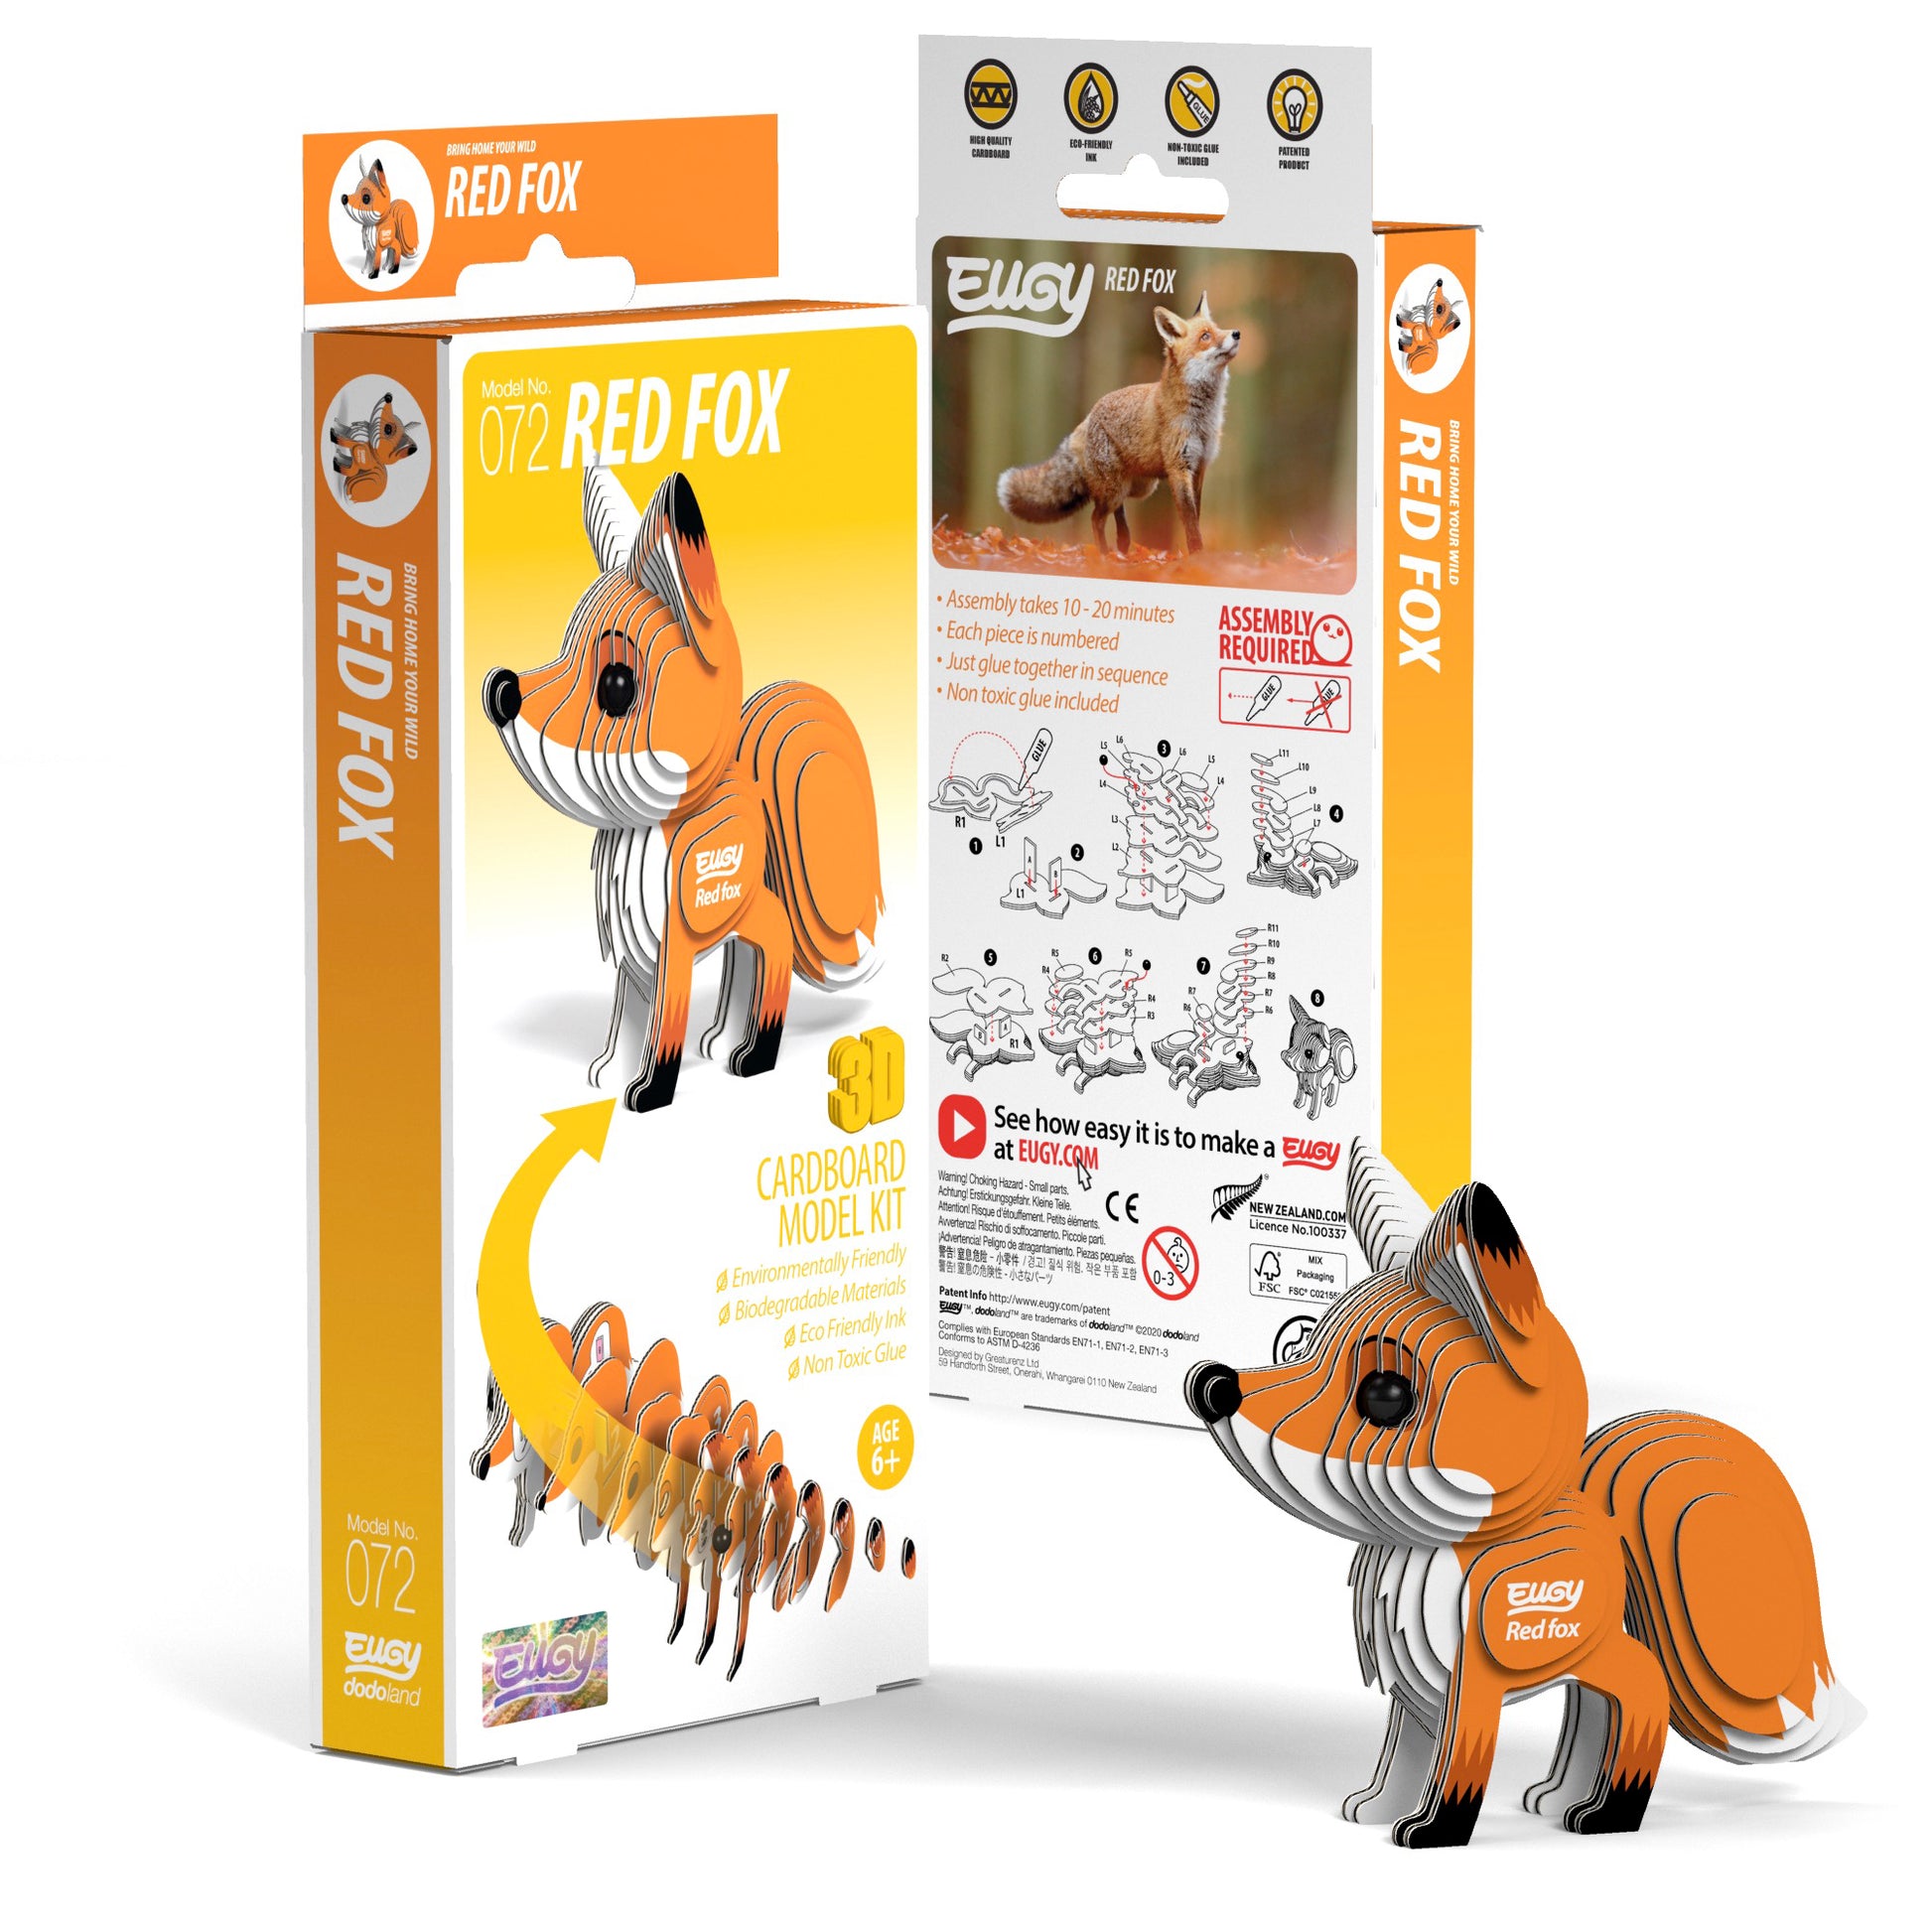 Embrace Elegance and Craftsmanship with a Red Fox 3D Puzzle by Eugy - 3D Red Fox ( 072 )